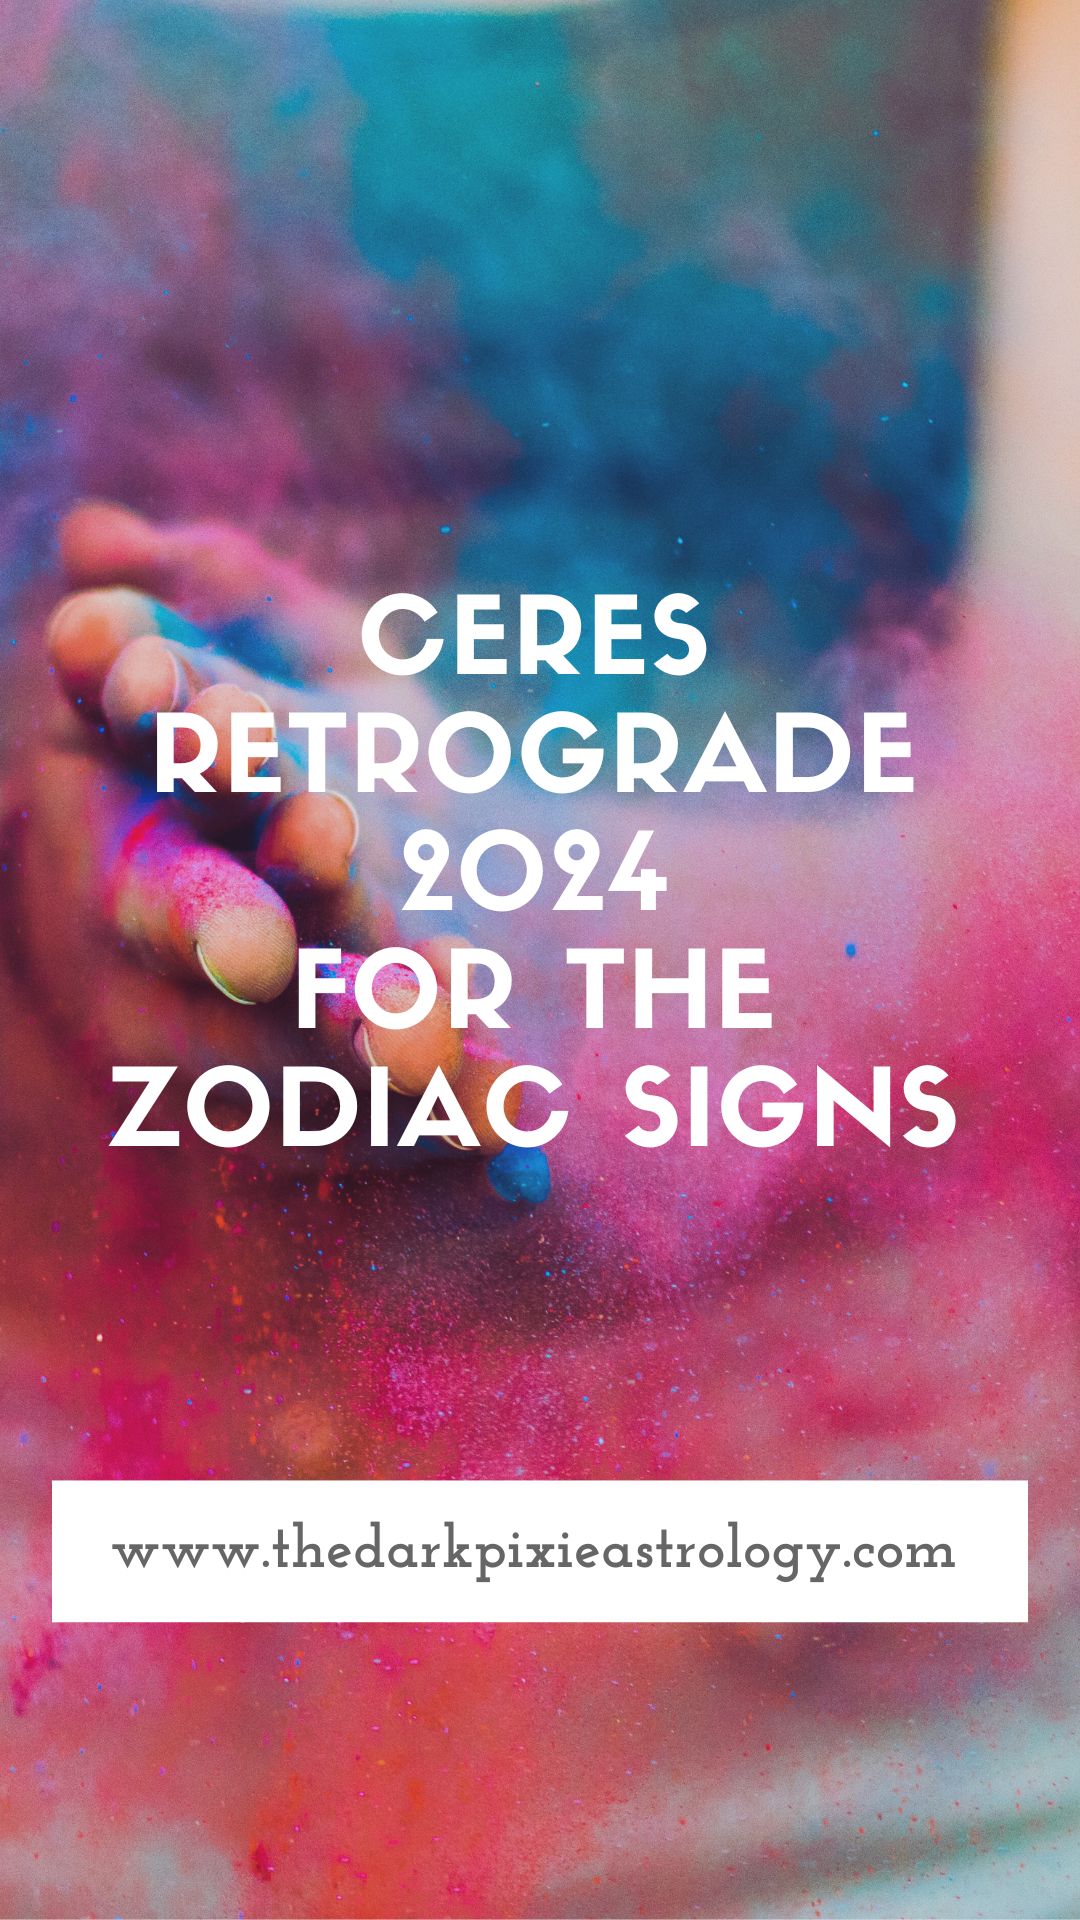 Ceres Retrograde 2024 for the Zodiac Signs - The Dark Pixie Astrology